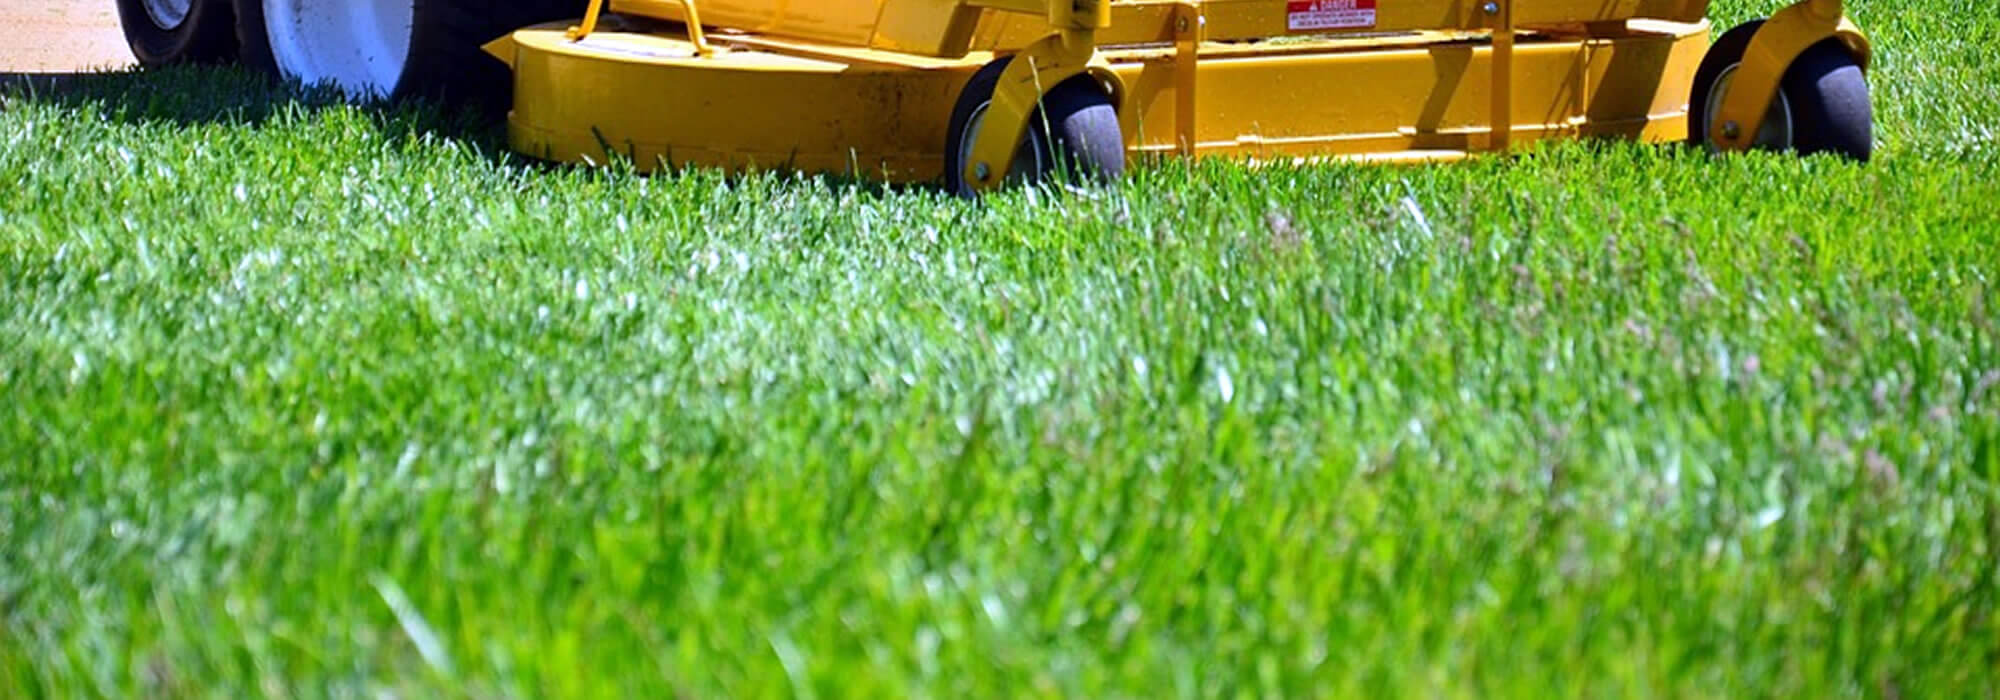 Lawn Mowing and Trimming Services Wisconsin